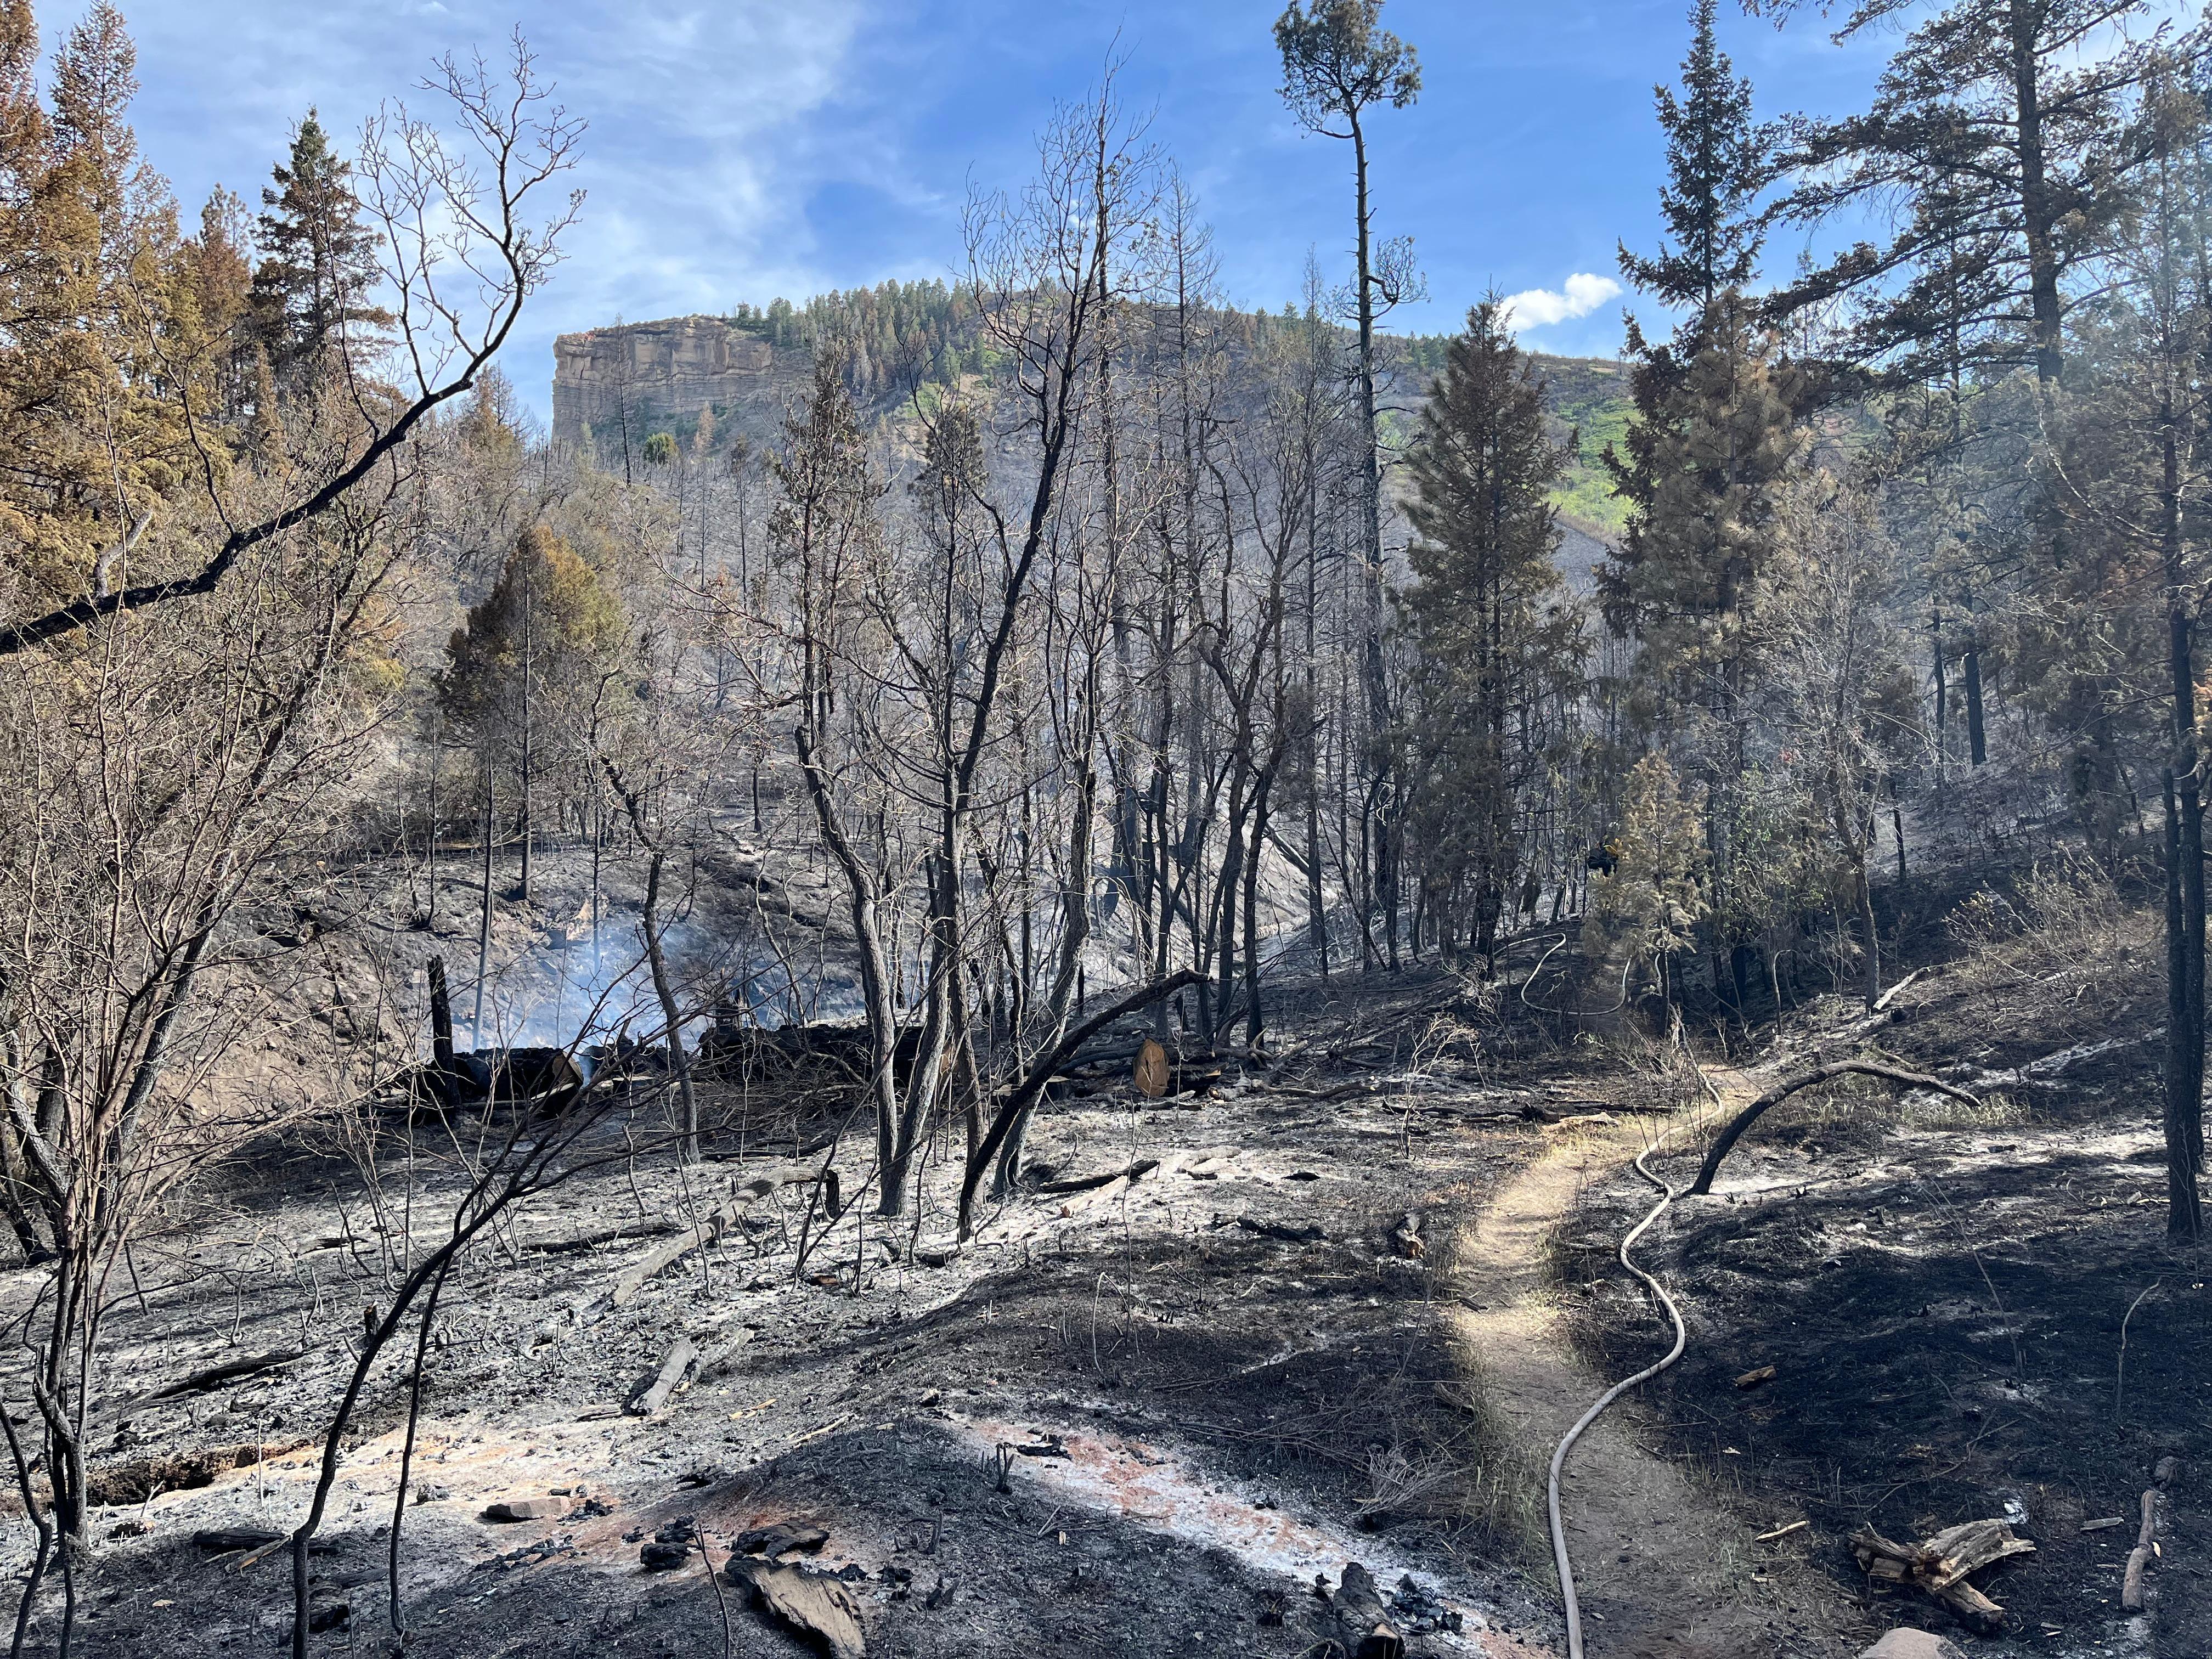 Incident Photo for the Perins Peak Fire